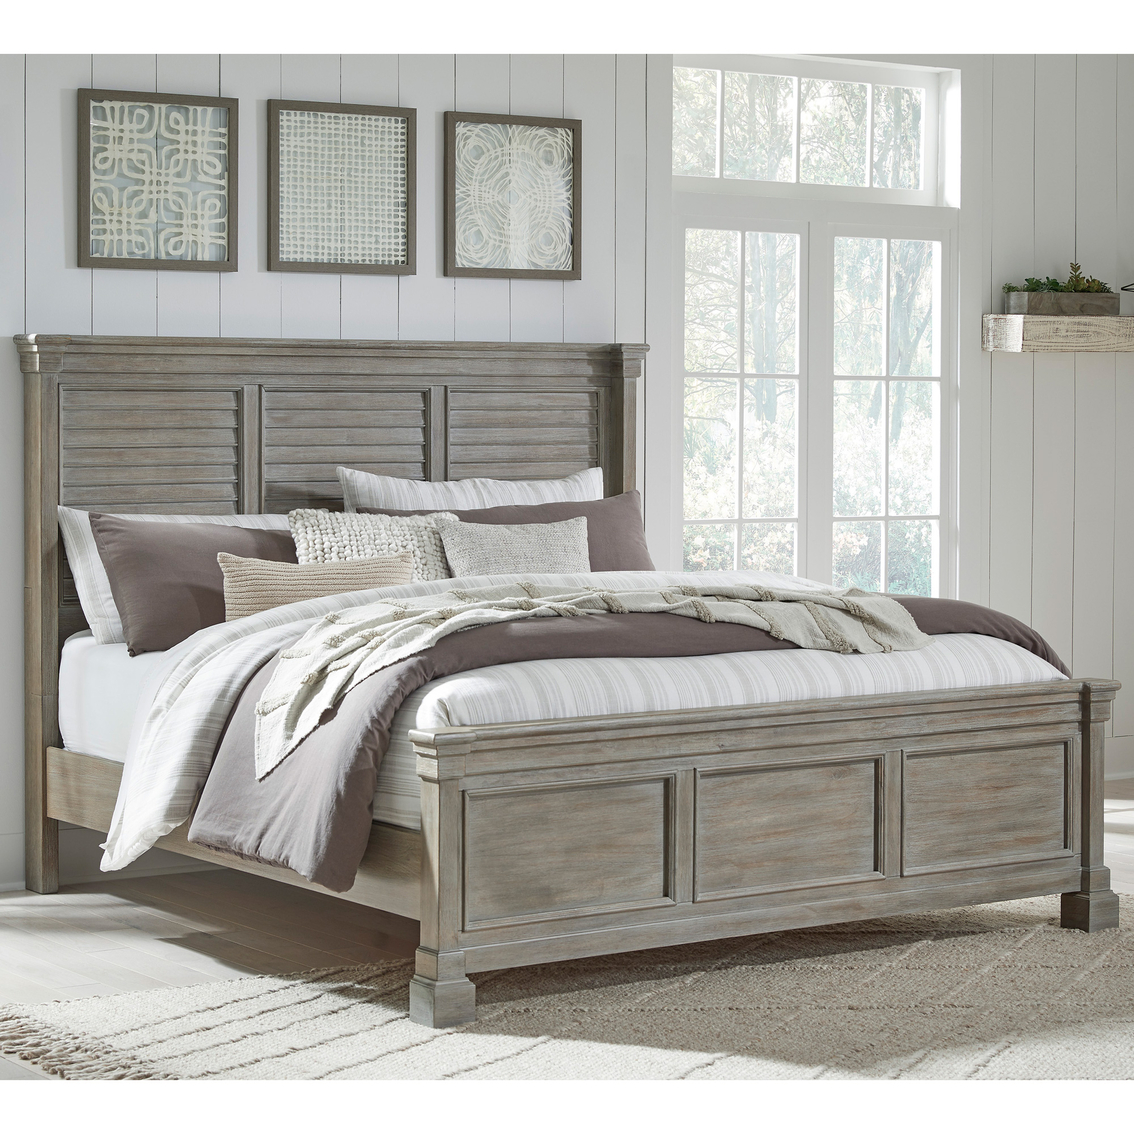 Signature Design By Ashley Moreshire 5 Pc. Panel Bedroom Set | Bedroom ...